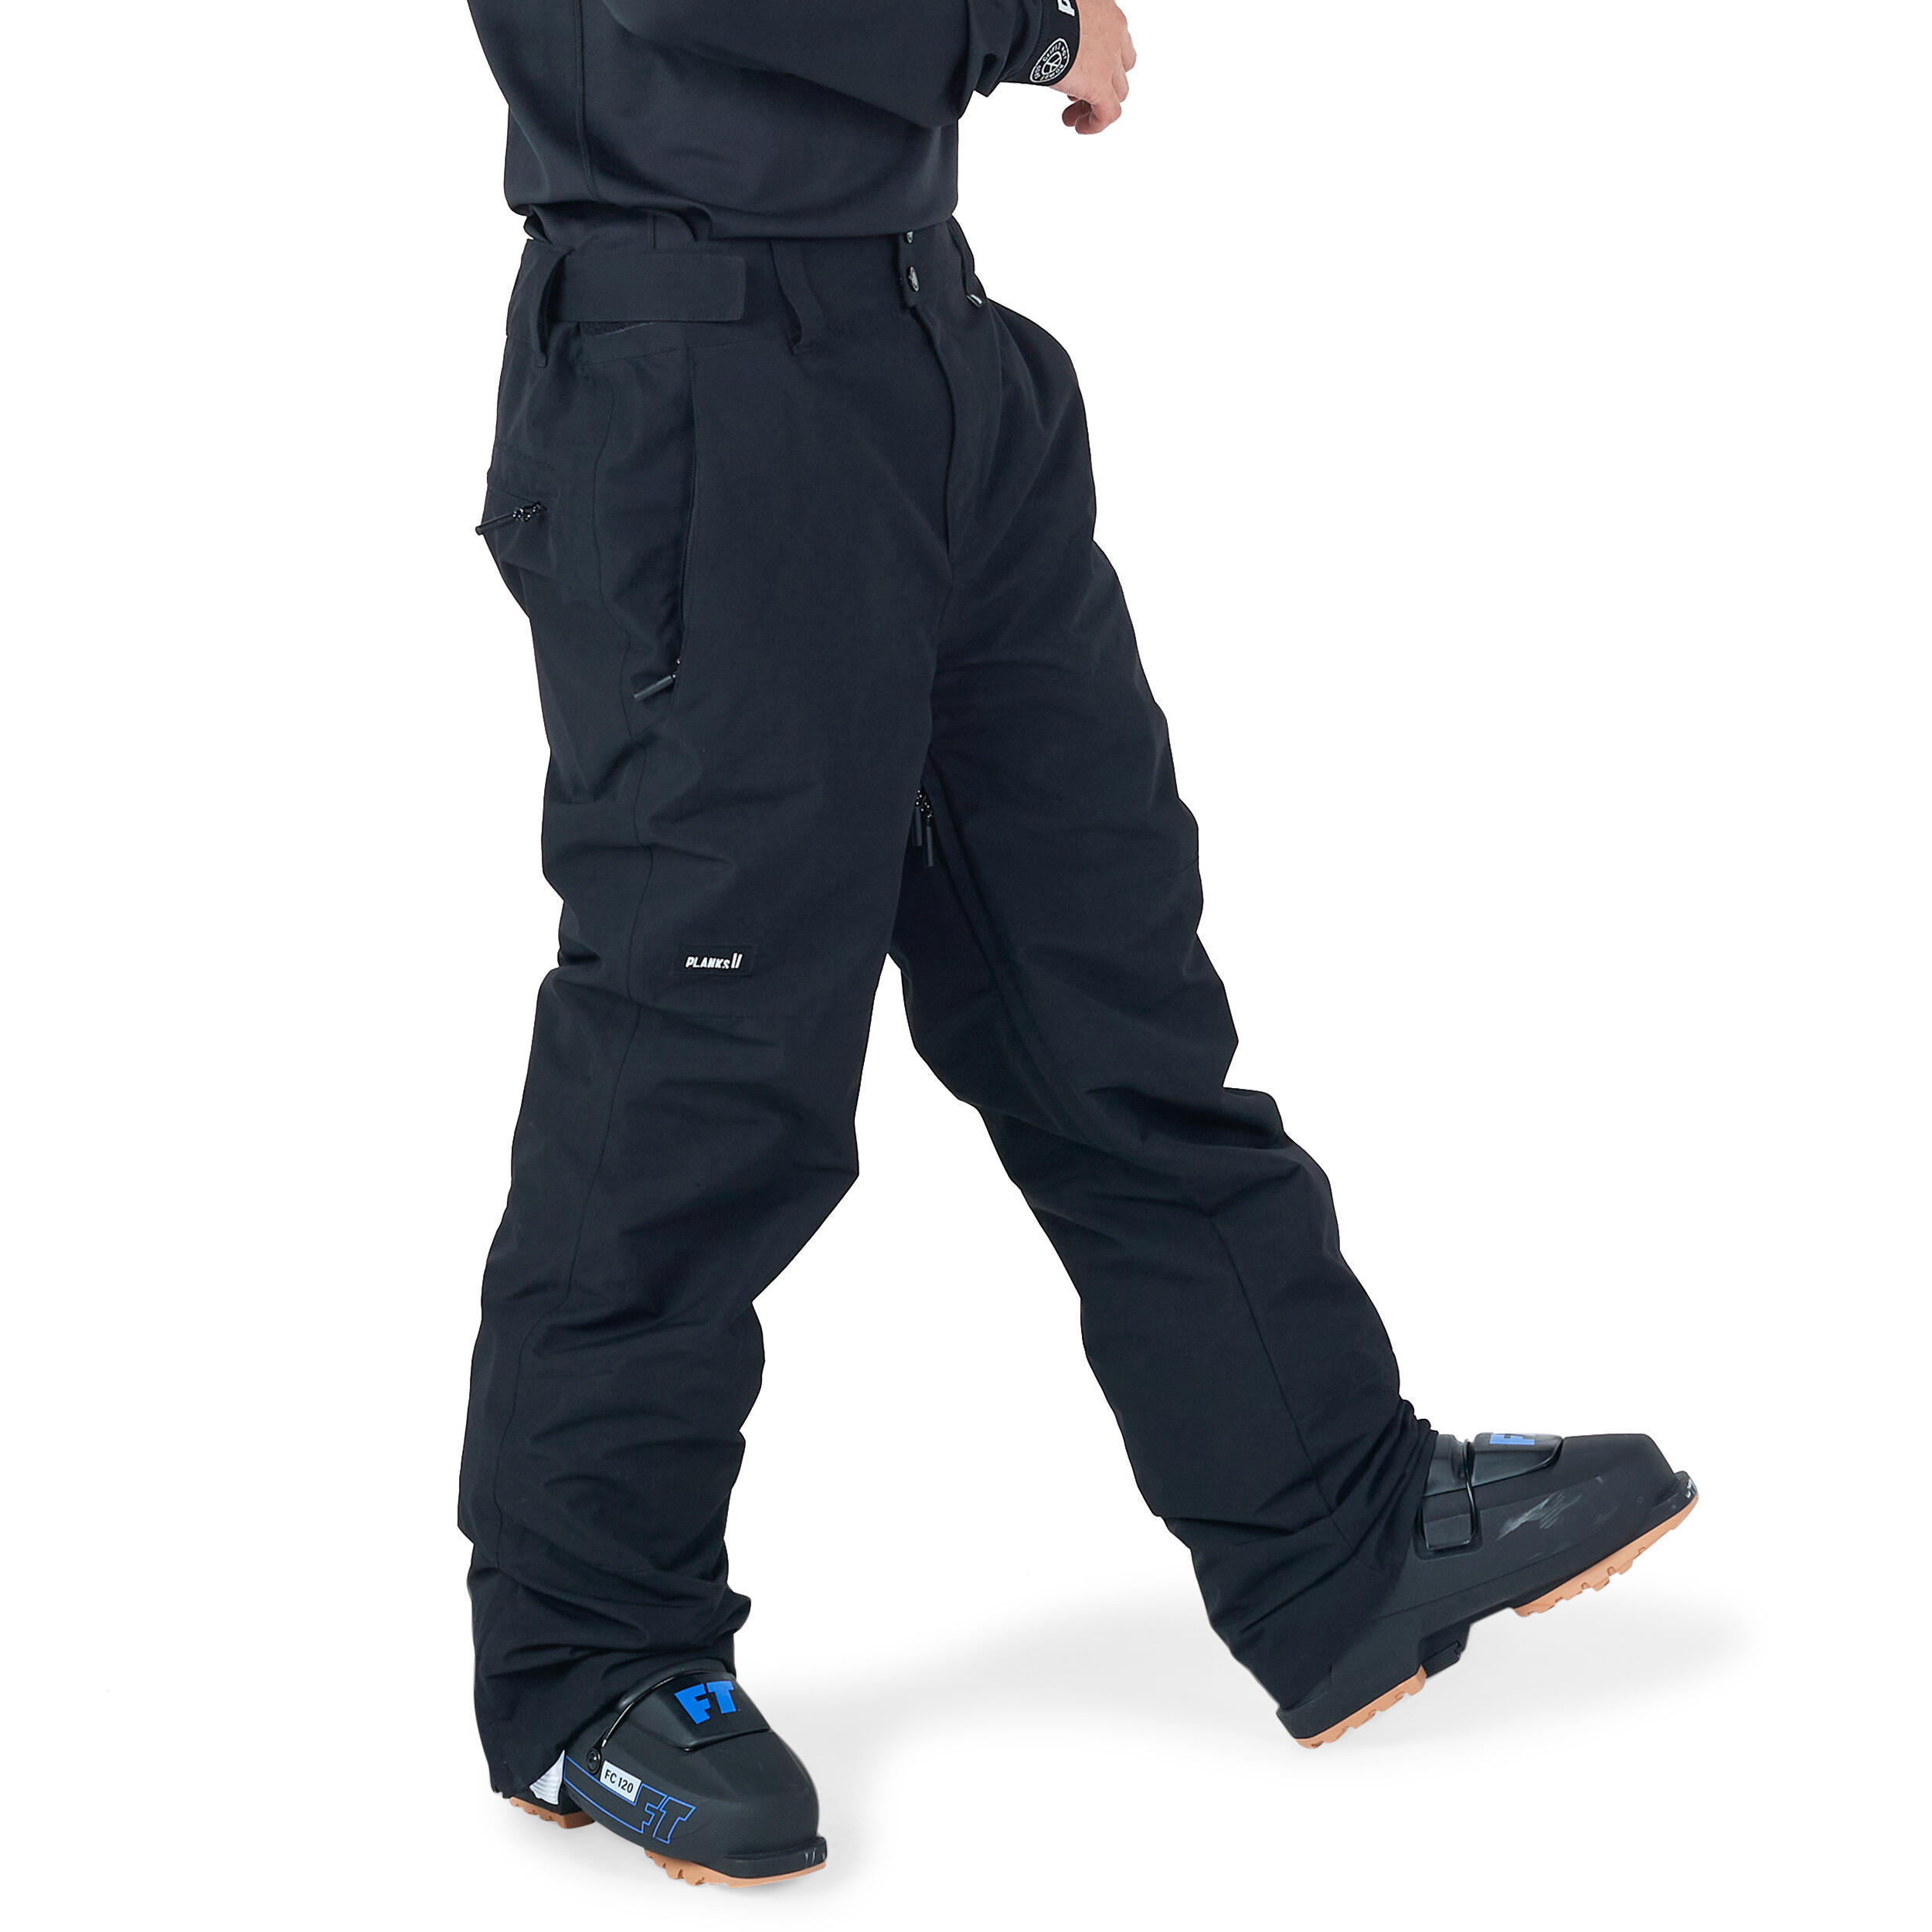 Planks Easy Rider Men's Ski Pants in Black with Pockets - Breathable Trousers 1/6